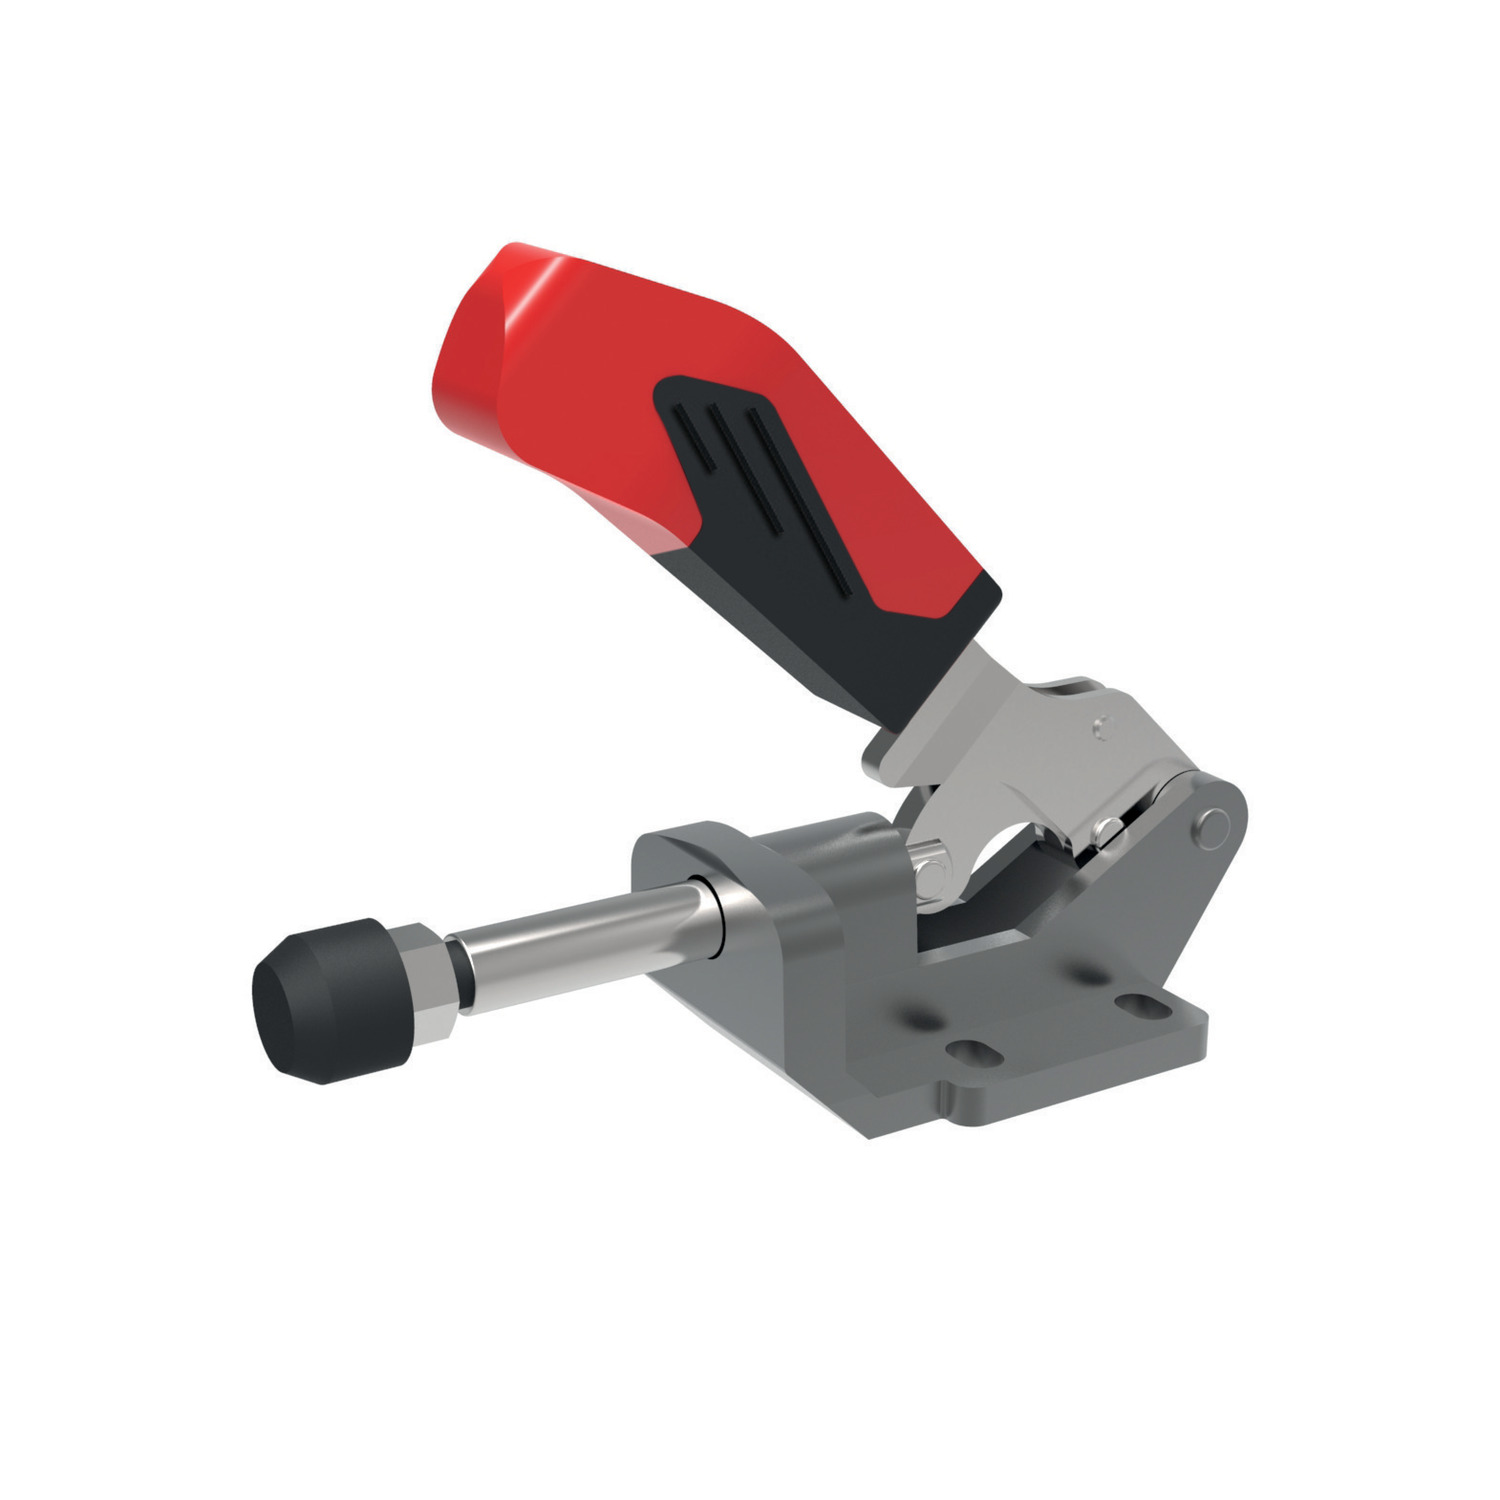 Heavy Duty Push-Pull Toggle Clamp Heavy duty push pull toggle clamps capable of maintaining up to 25KN of force. Made from malleable casting metal.